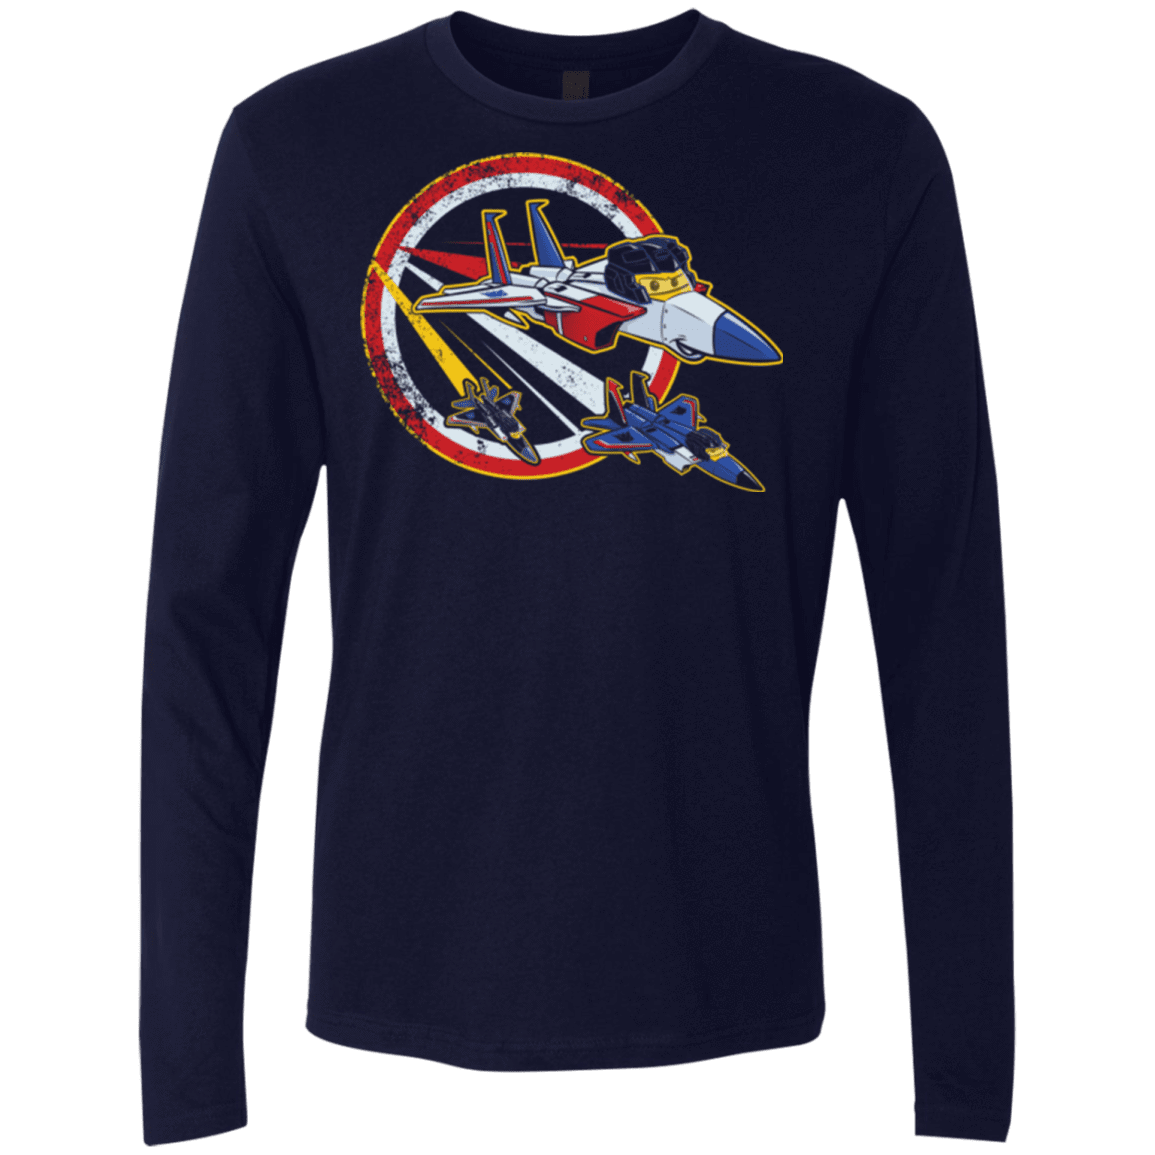 T-Shirts Midnight Navy / Small Seekers Conquest Men's Premium Long Sleeve